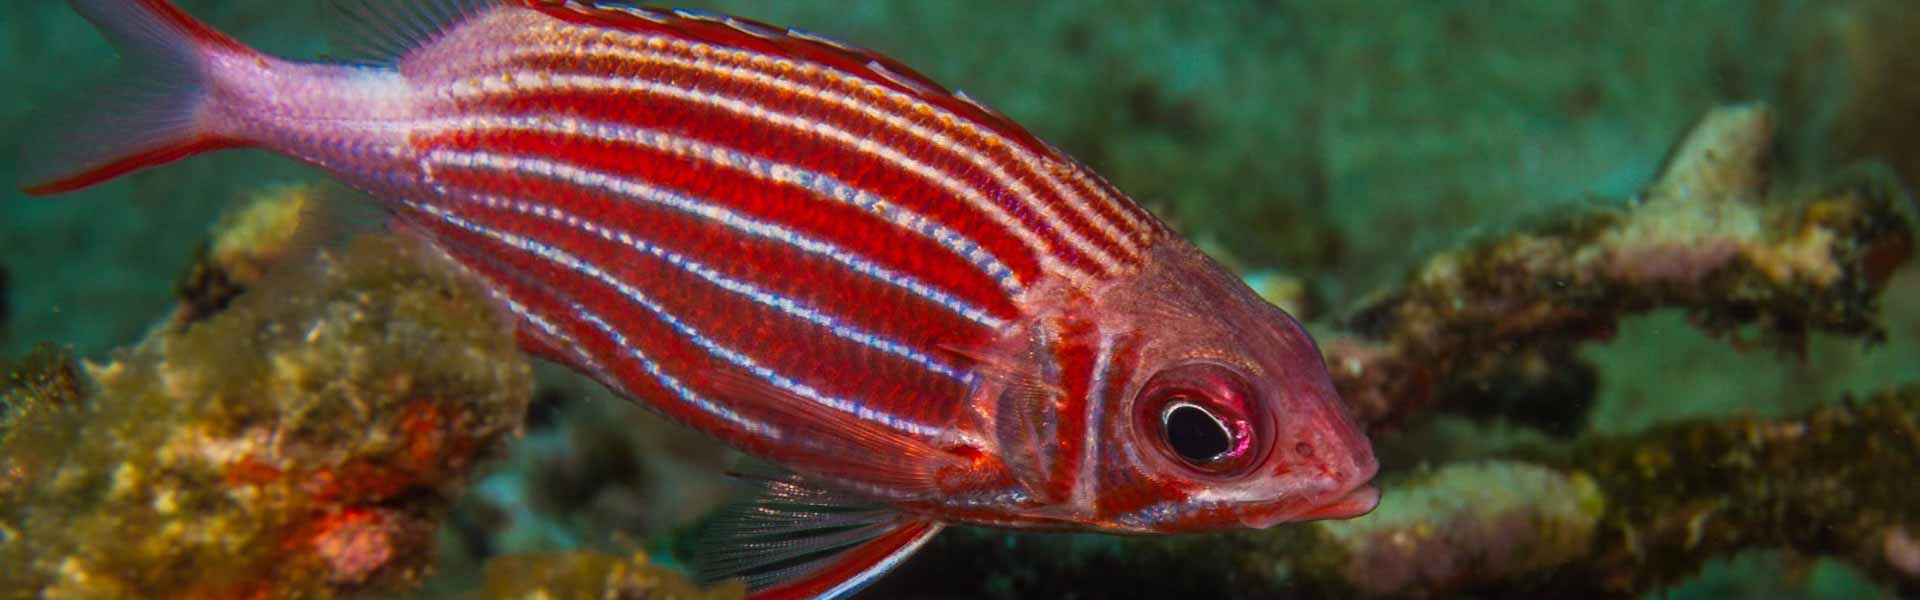 the-red-sea-squirrelfish